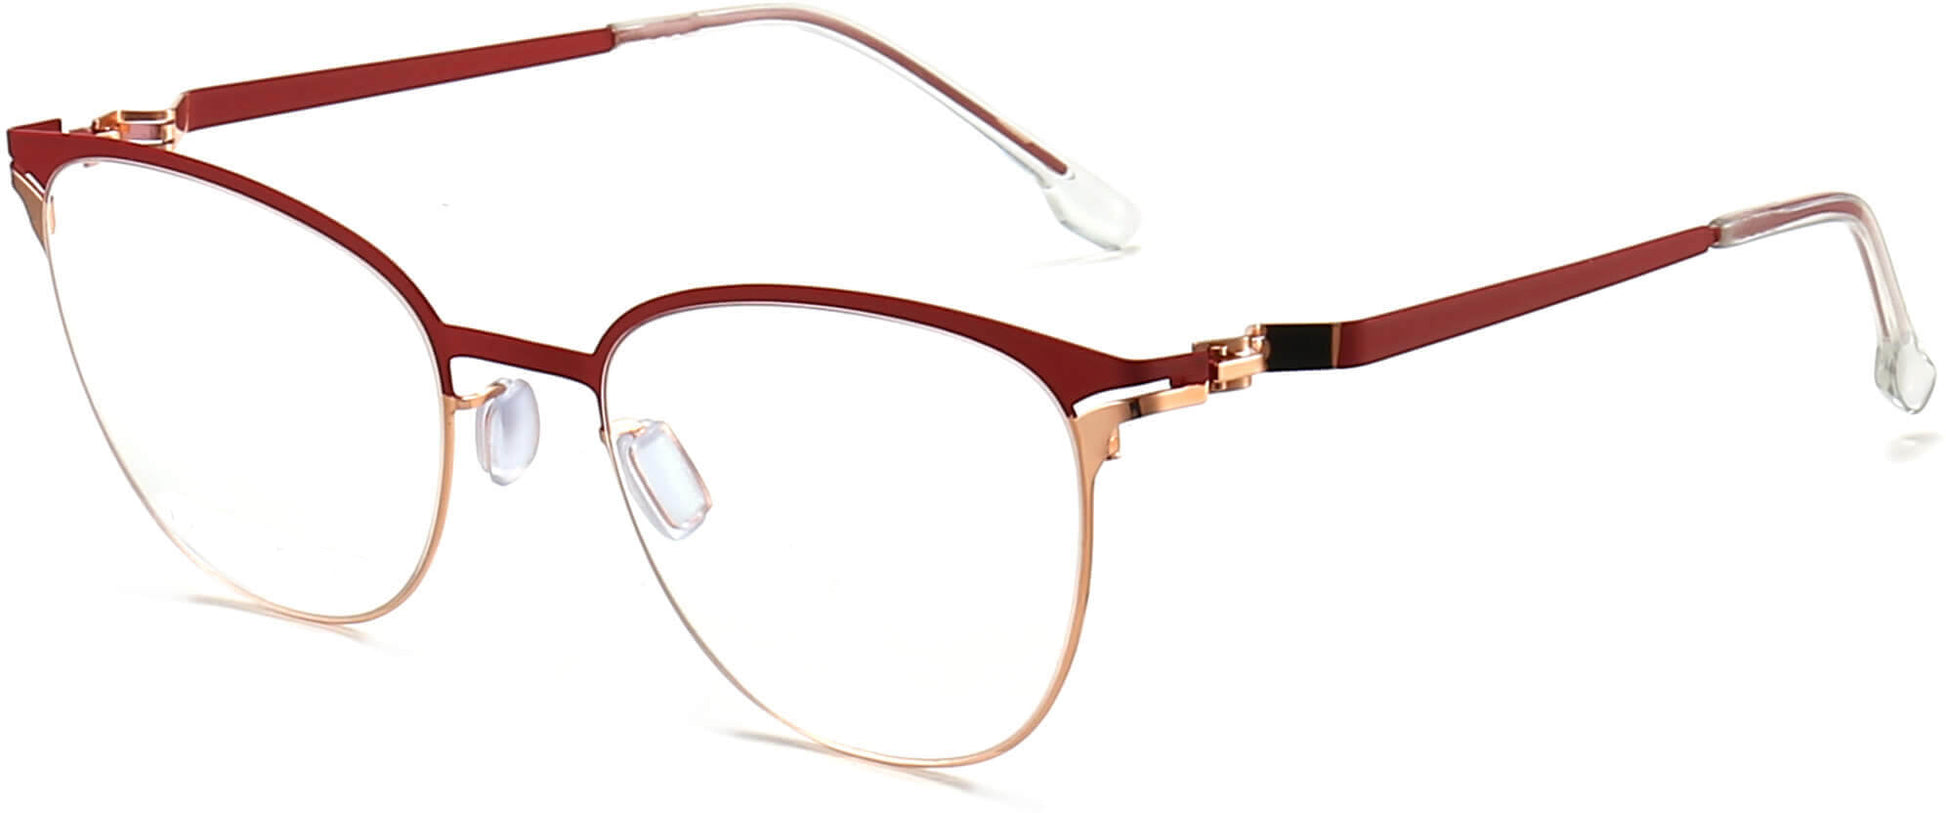 Thea Cateye Red Eyeglasses from ANRRI, angle view